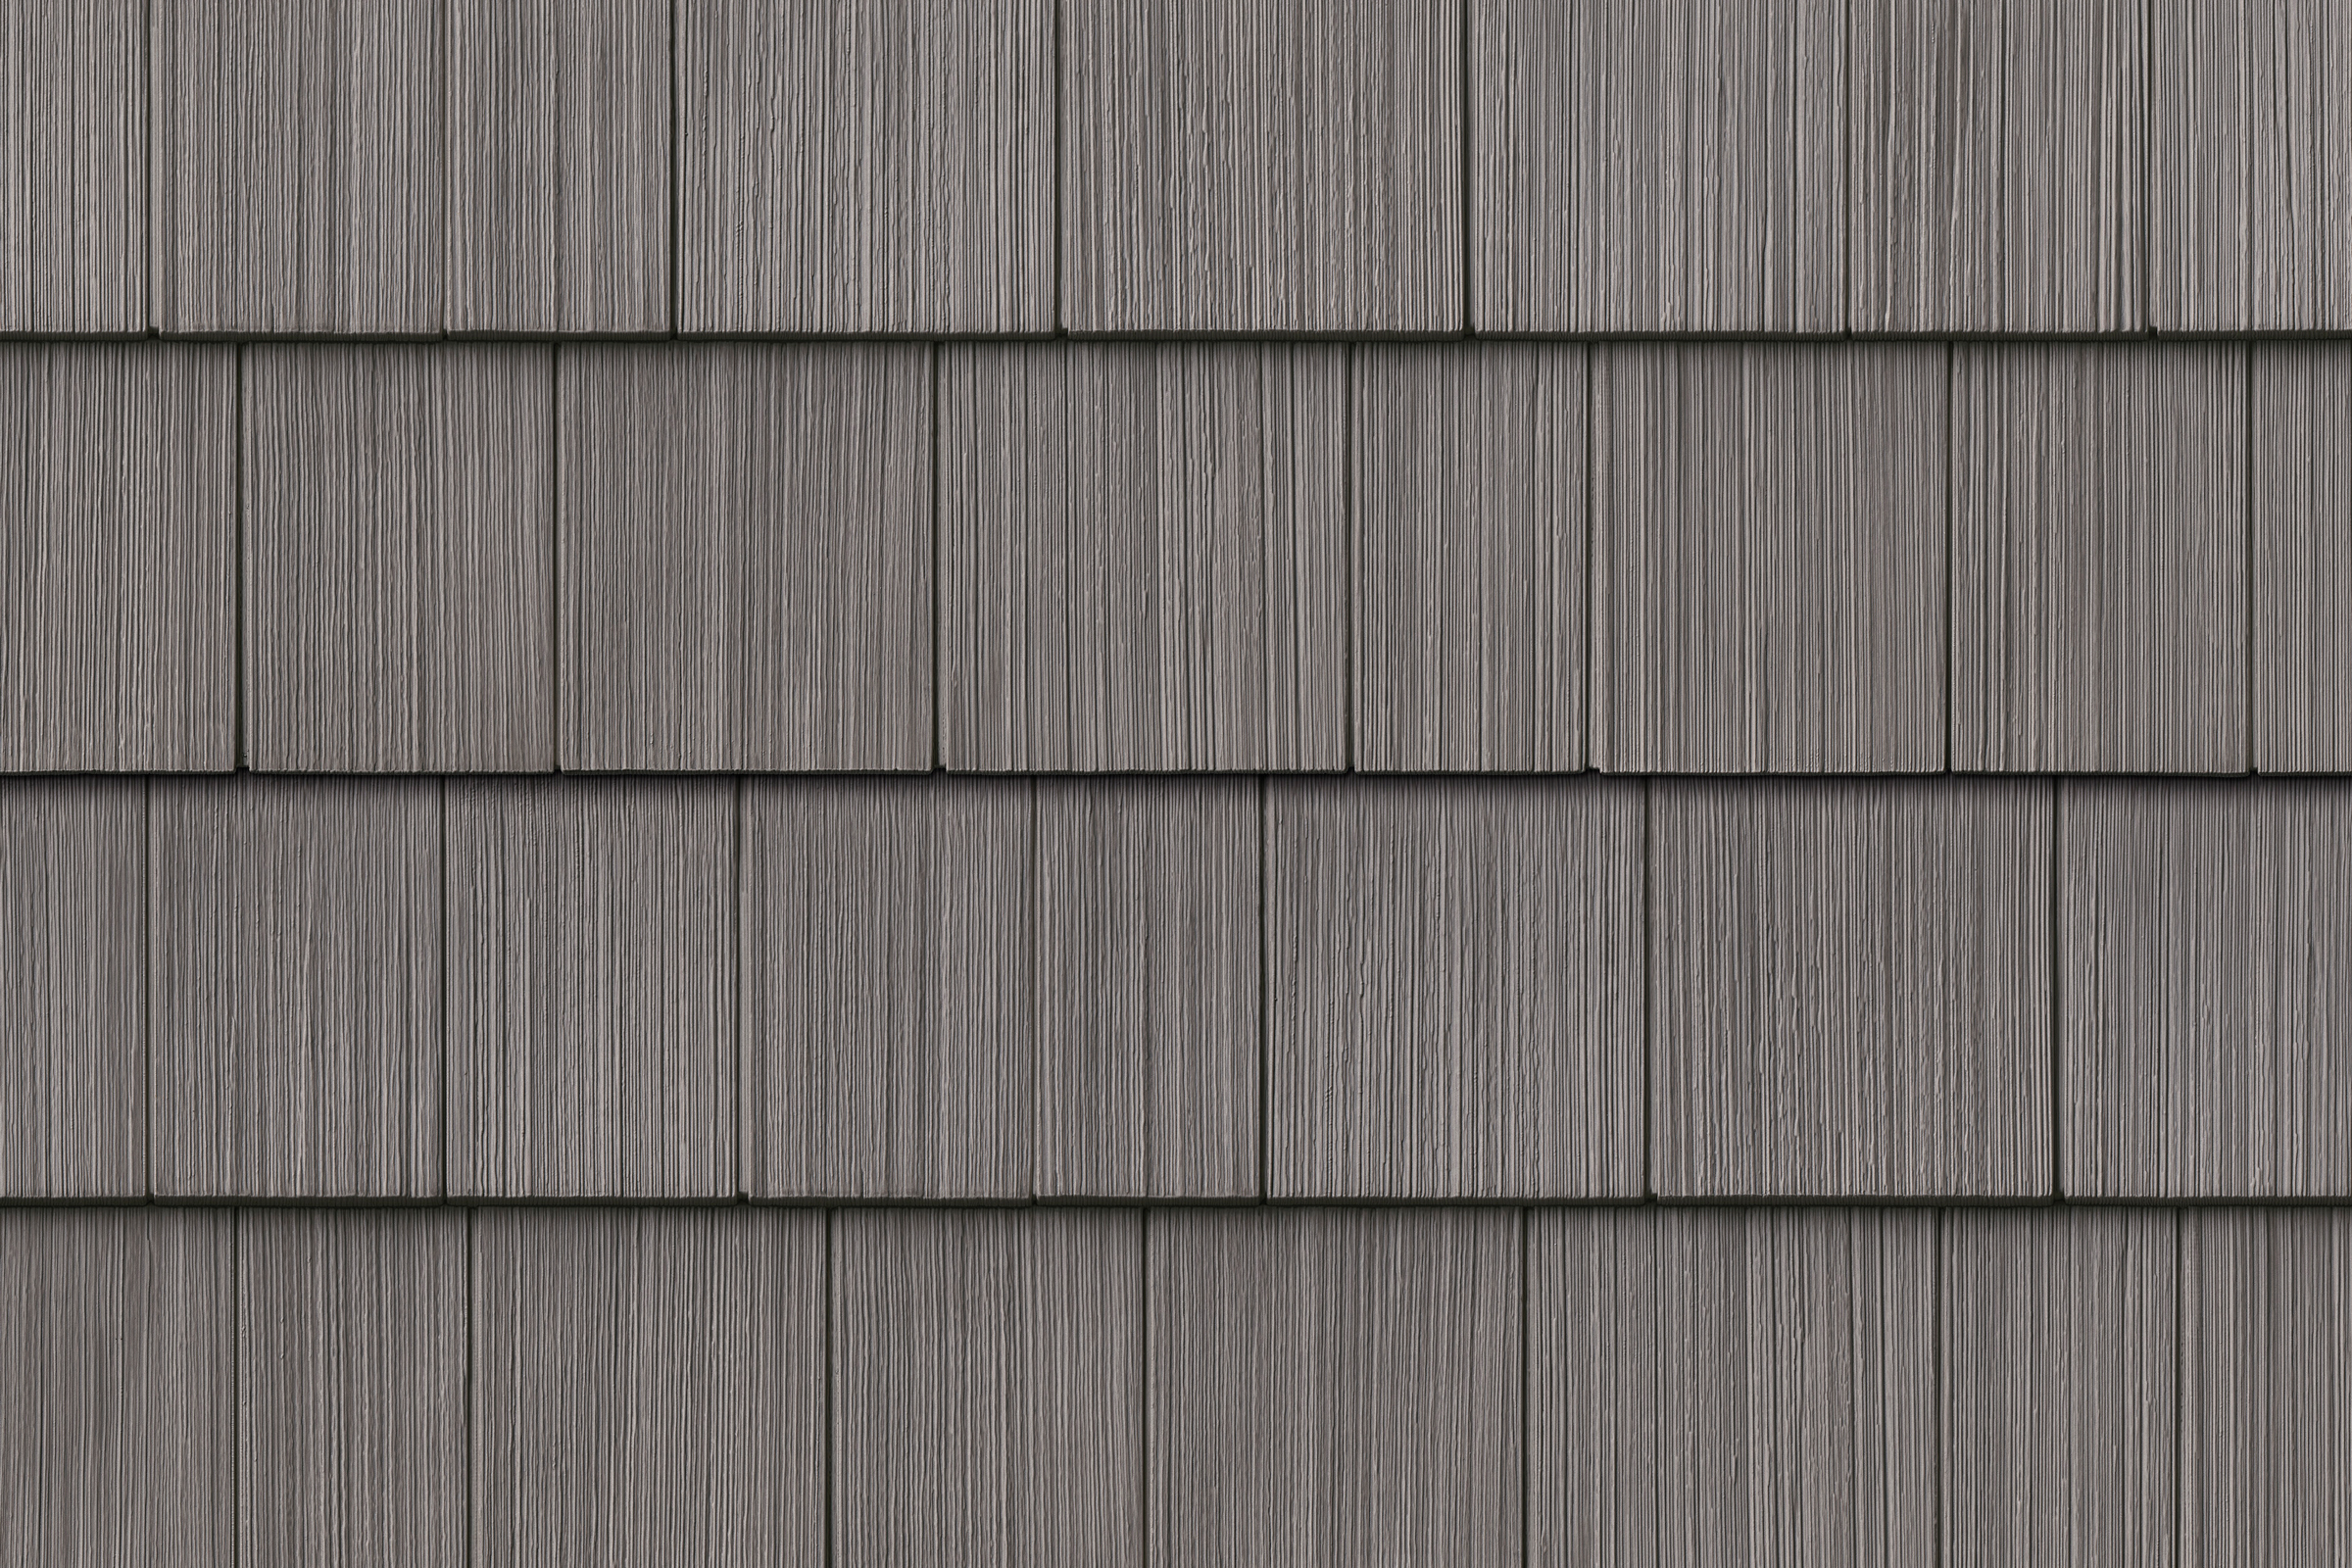 siding-industry-innovations-Portsmouth-Shake-and-Shingles_RusticGray-03